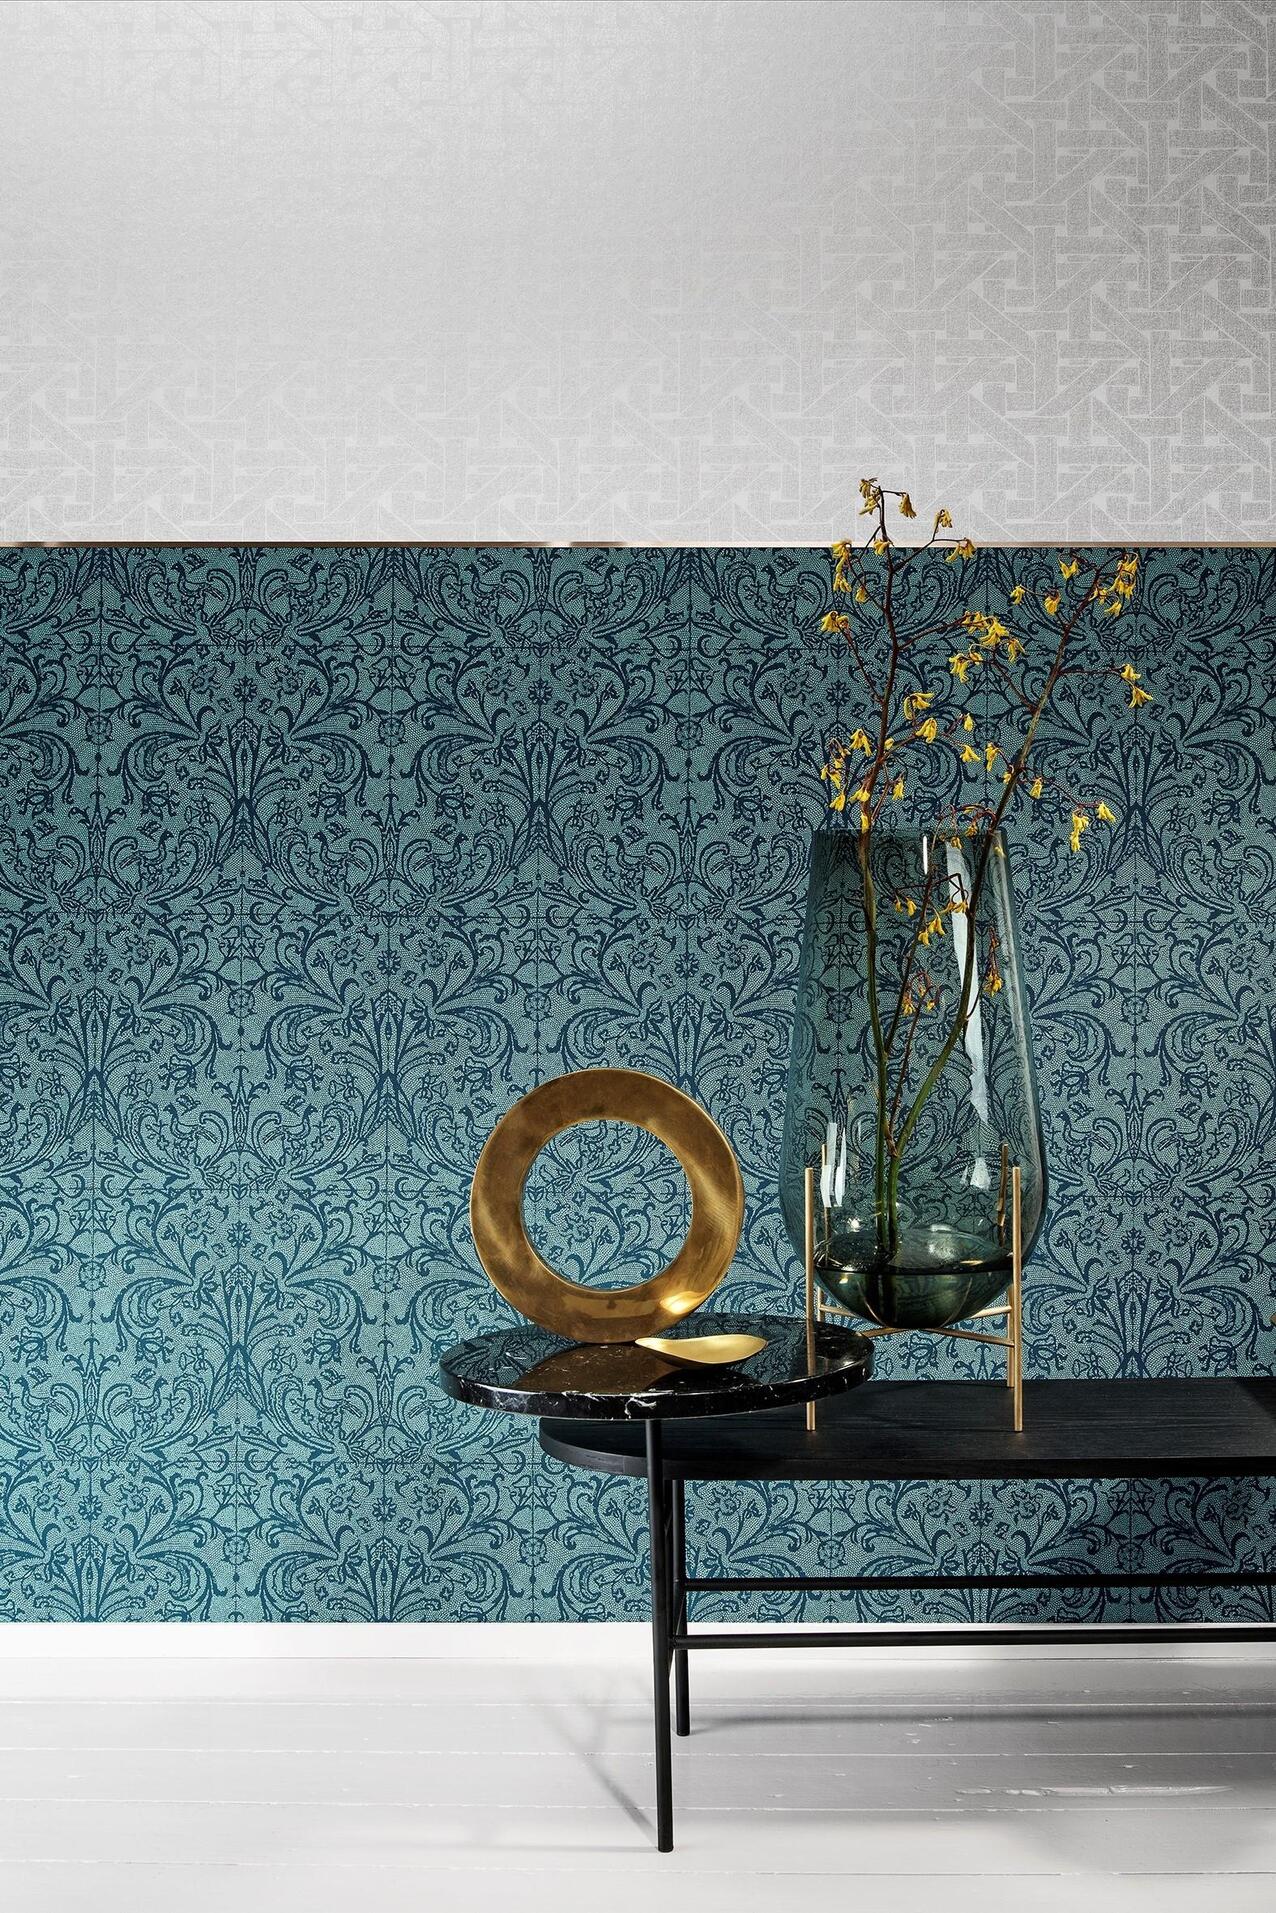 hooked-on-walls-classy-vibes-graceful-wallcovering